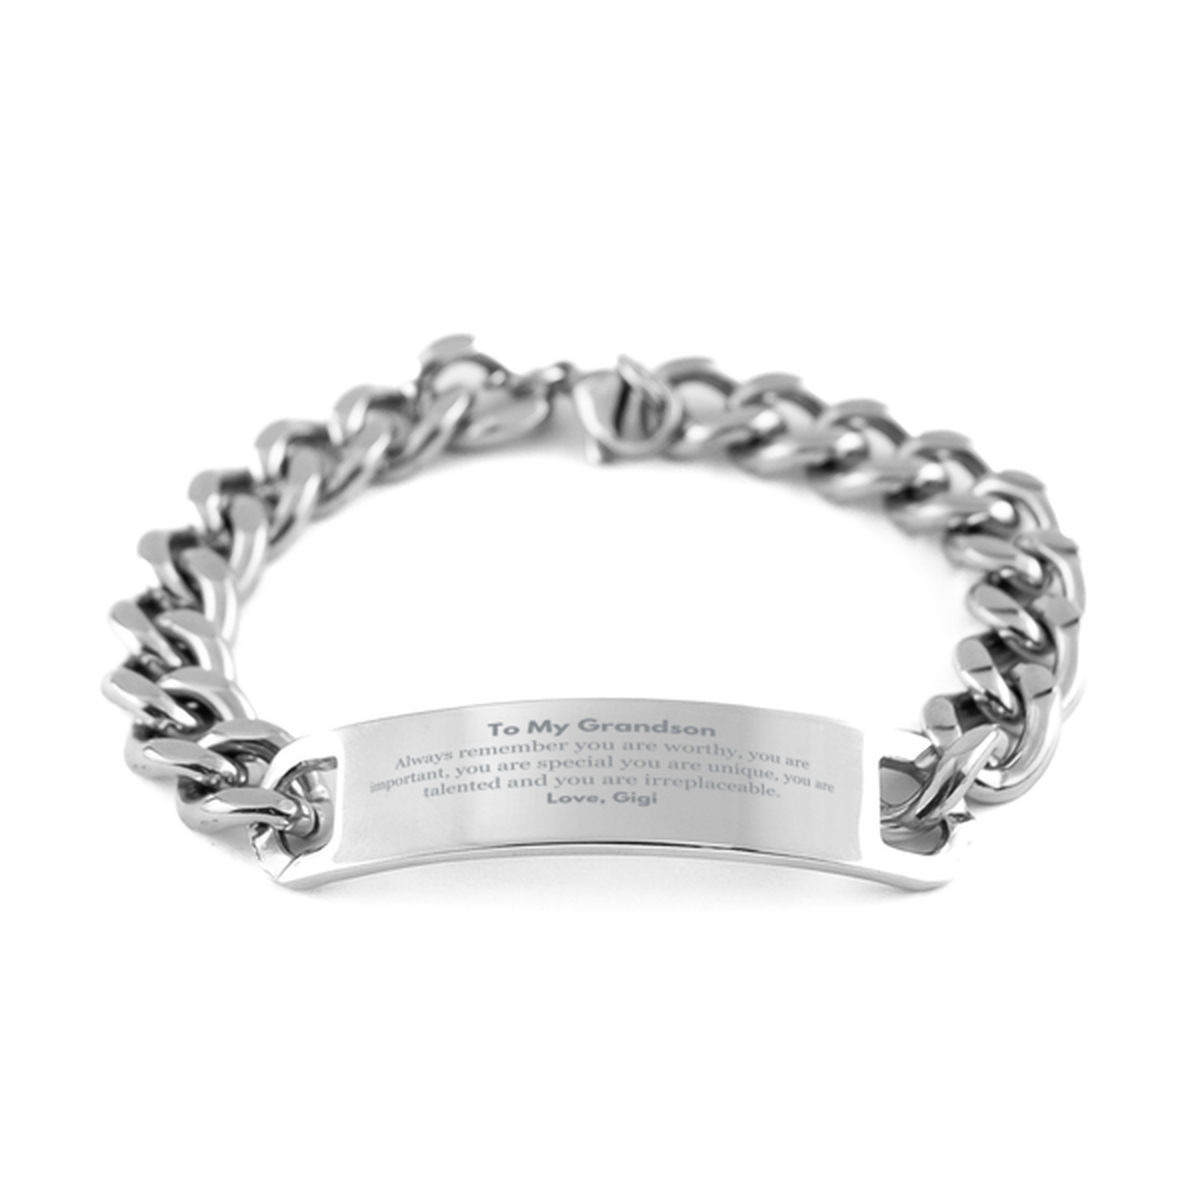 Grandson Birthday Gifts from Gigi, Inspirational Cuban Chain Stainless Steel Bracelet for Grandson Christmas Graduation Gifts for Grandson Always remember you are worthy, you are important. Love, Gigi